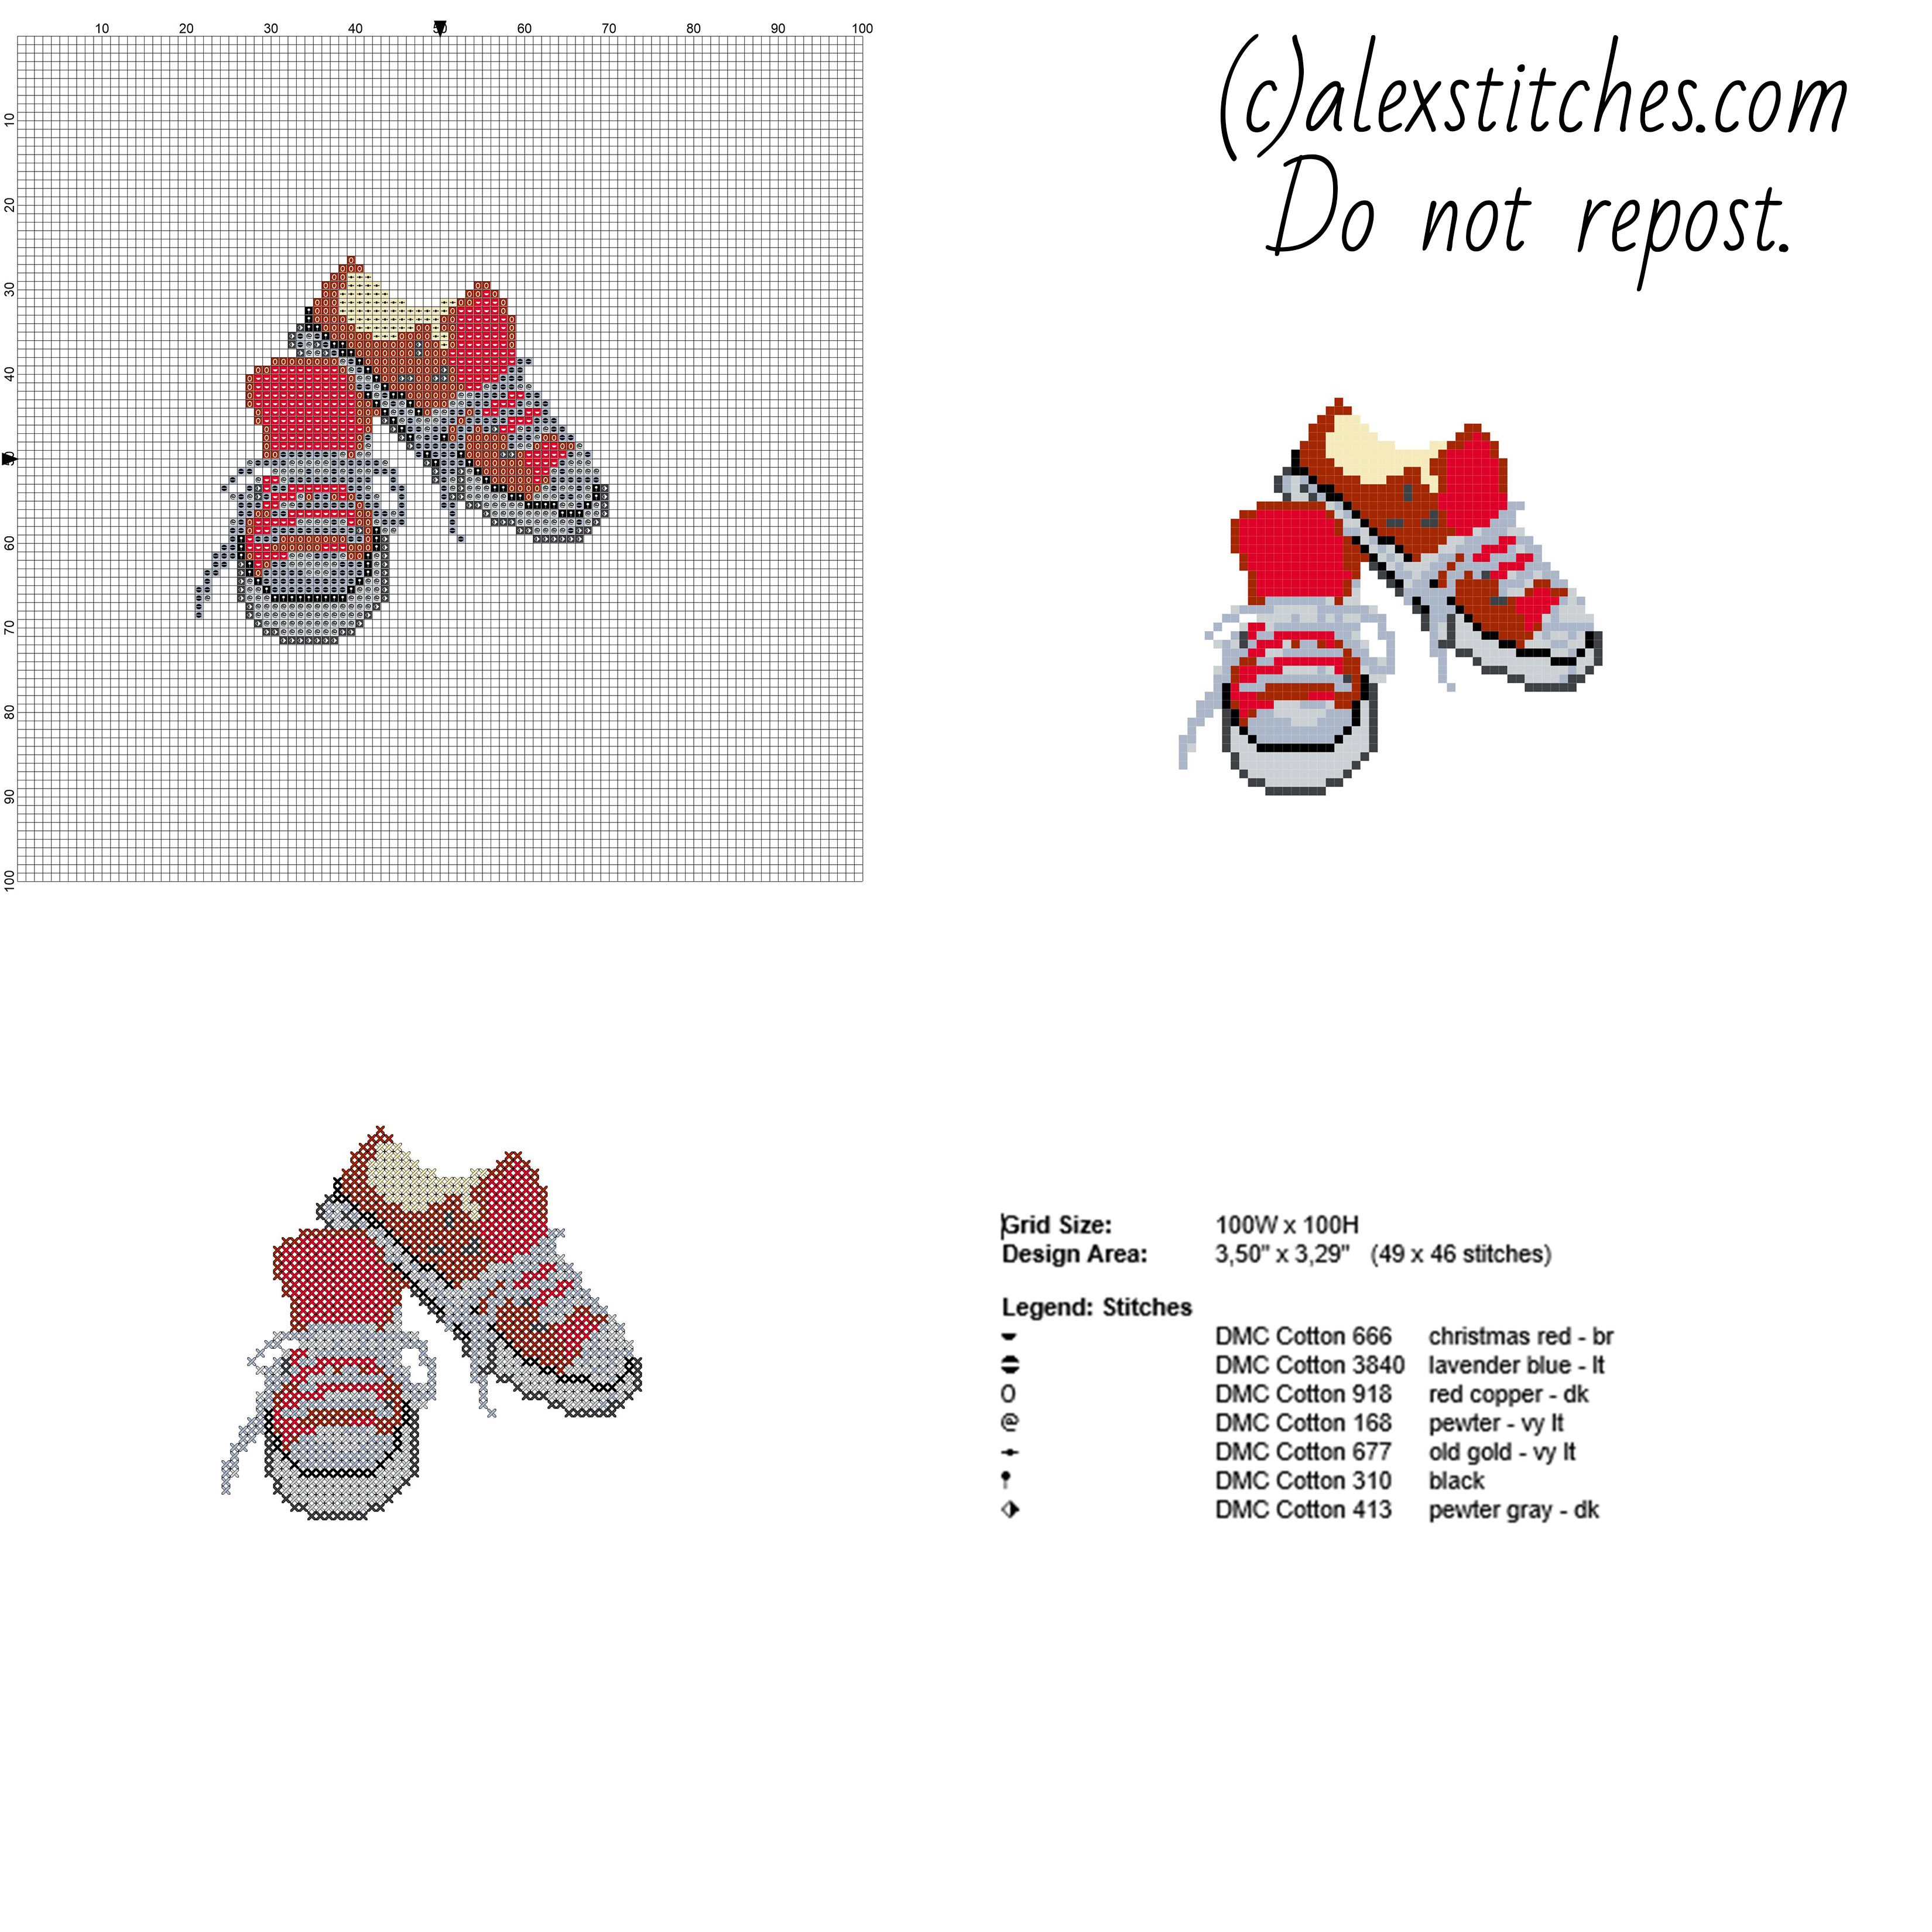 A child pair of red Converse shoes free and small cross stitch pattern 49x46 stitches 7 DMC threads